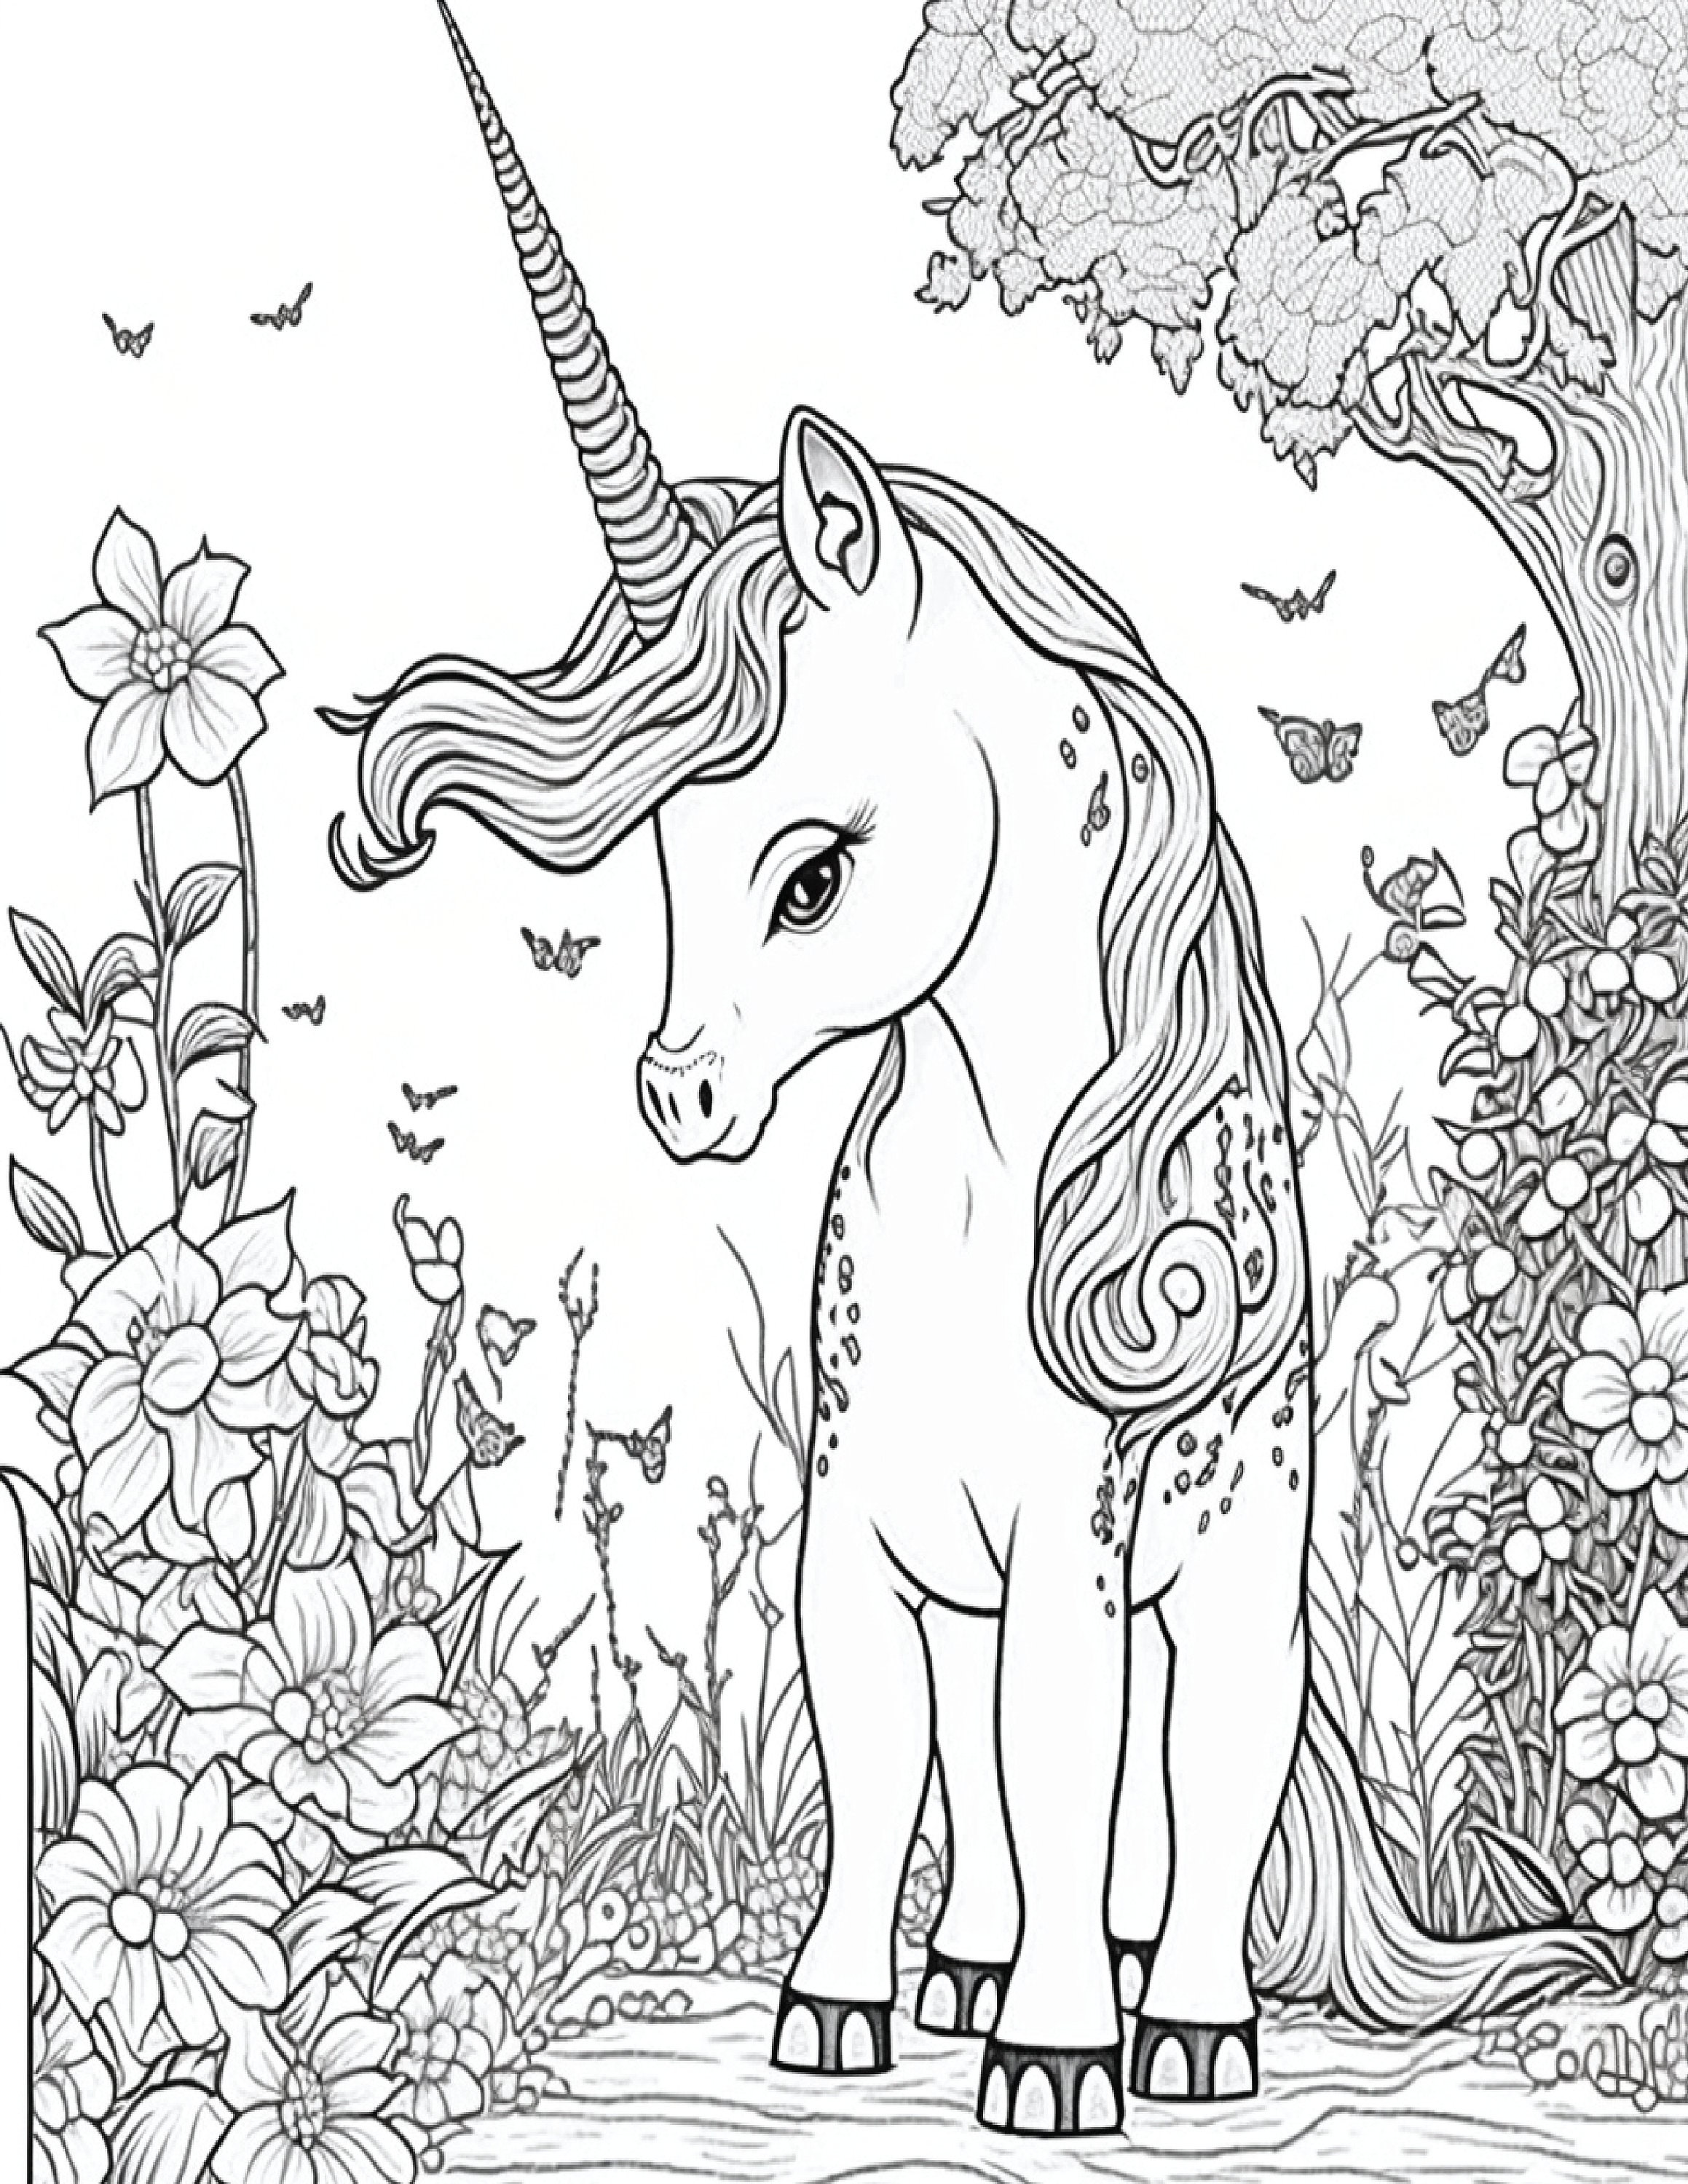 Book1 25 Unicorn Coloring Pages Printable Unicorn - Etsy